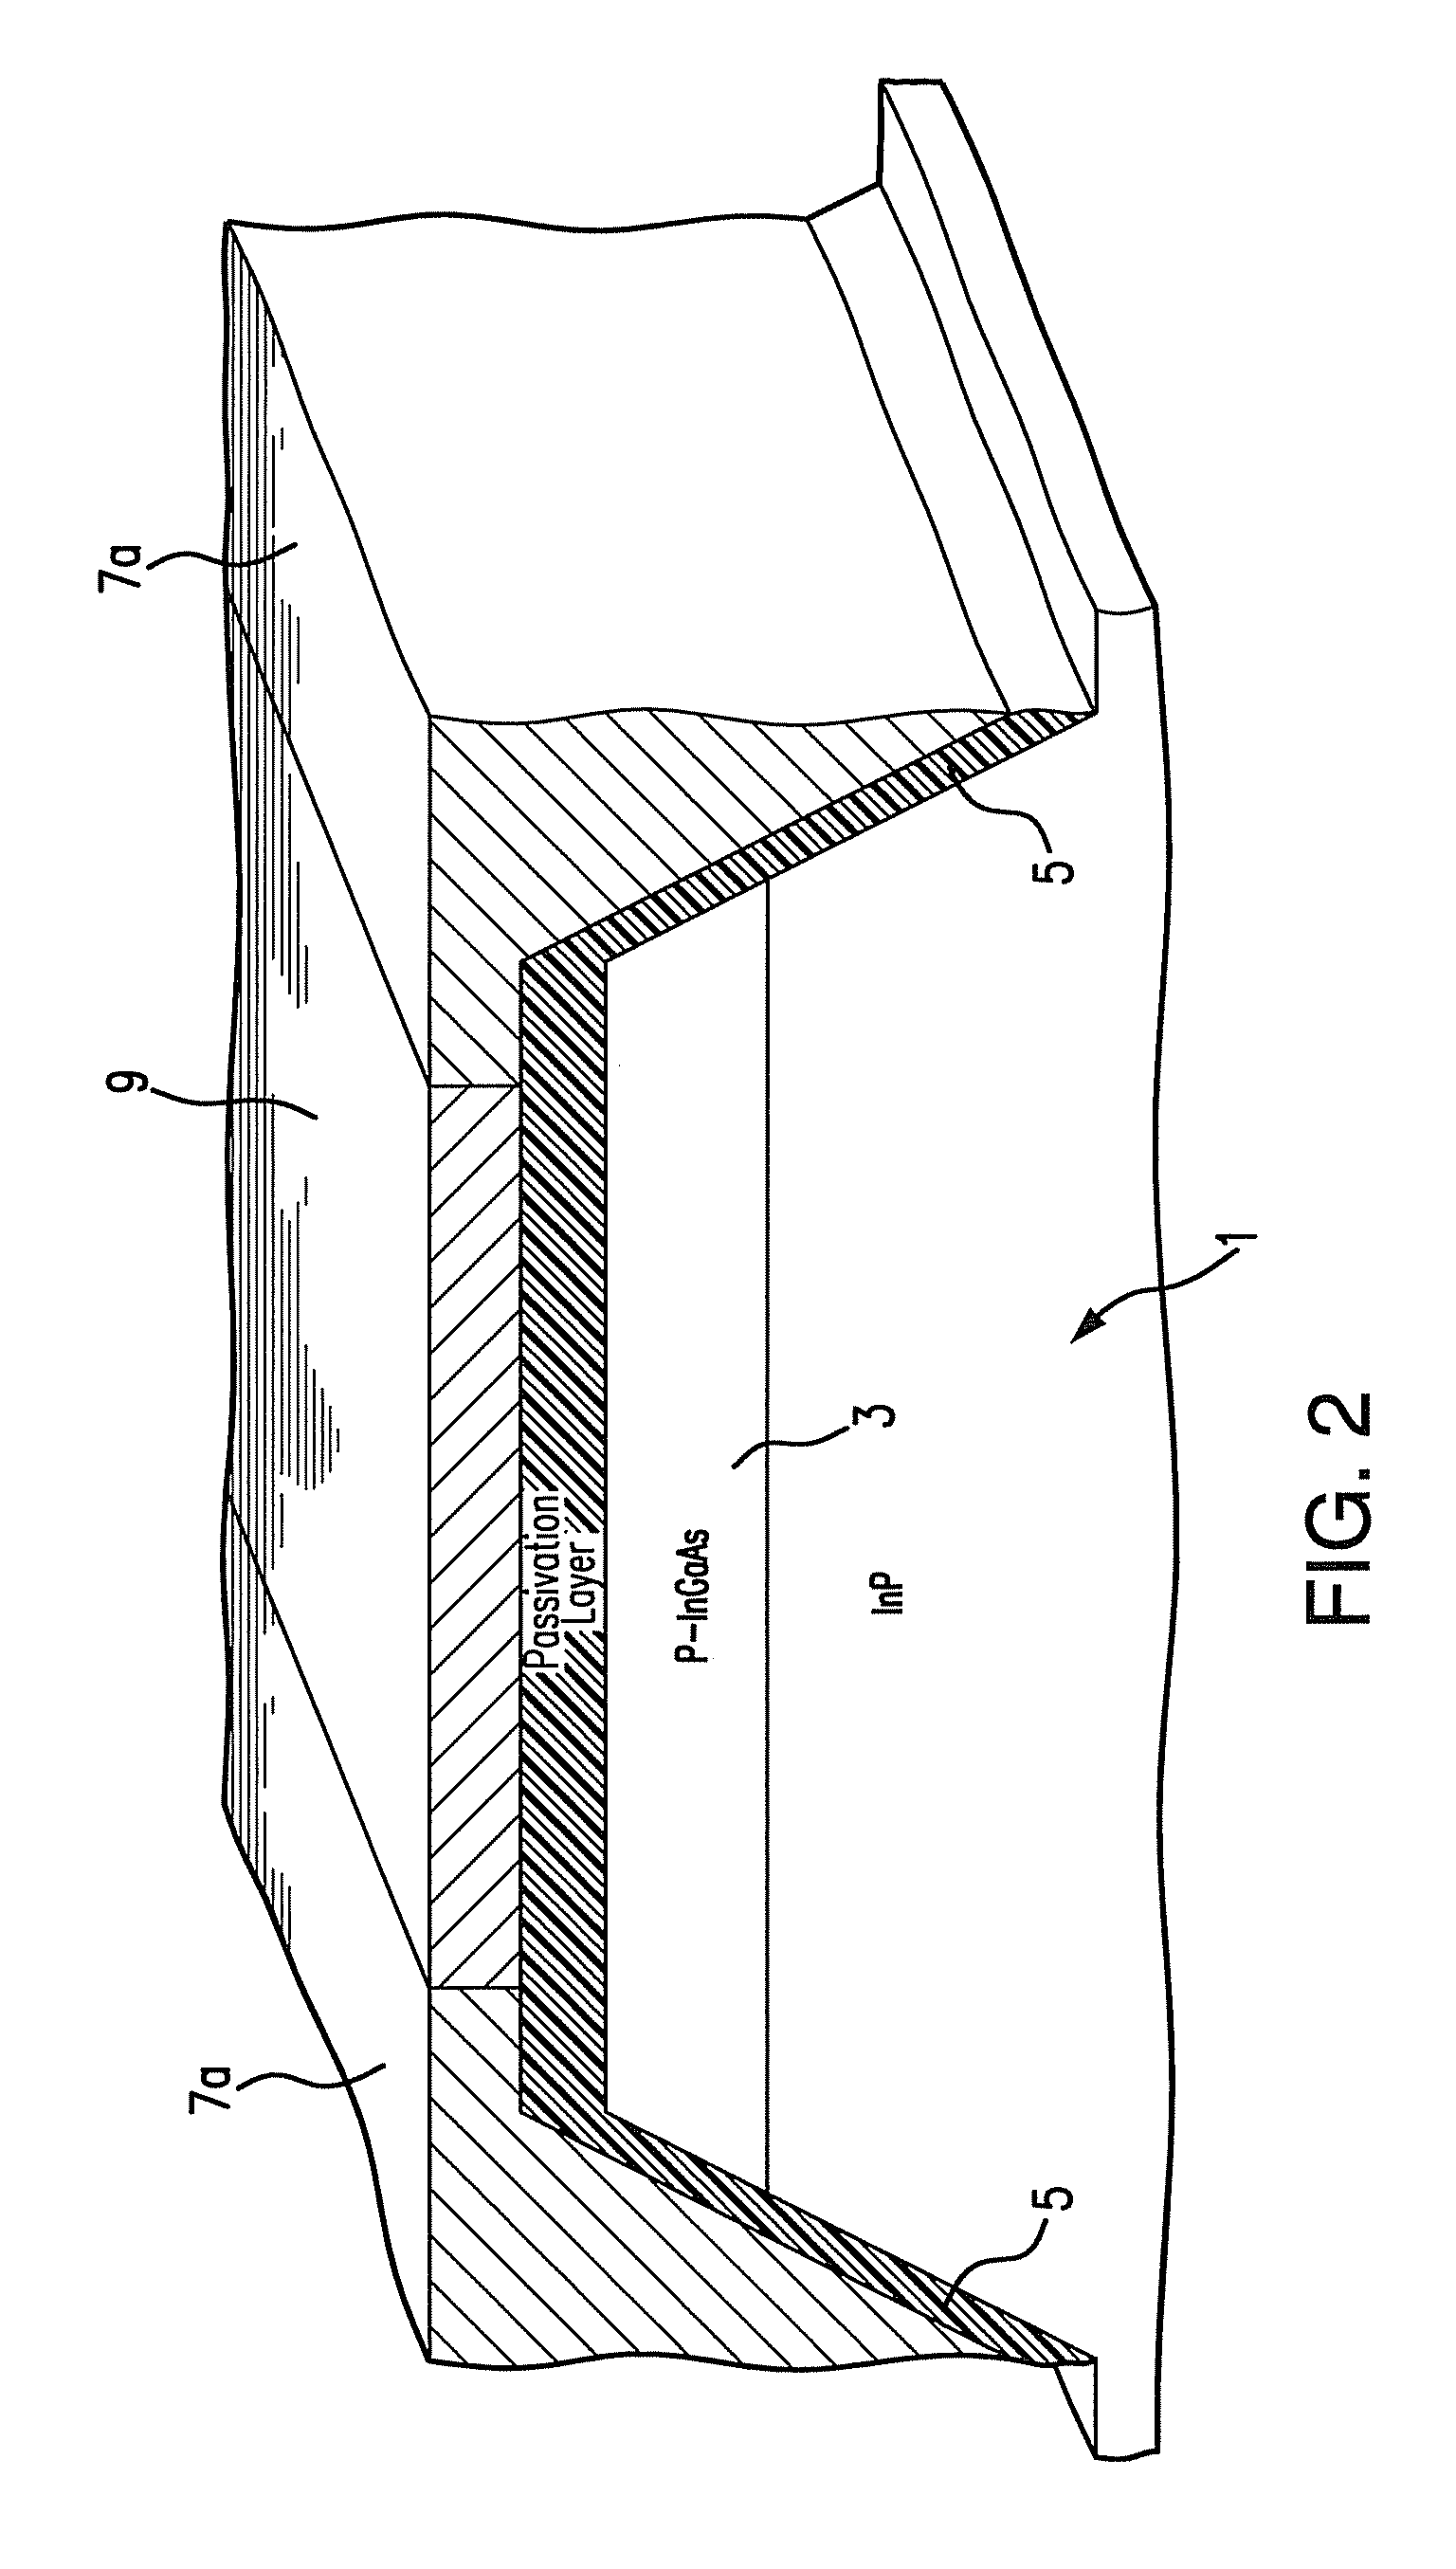 Conformal metallization process for the fabrication of semiconductor laser devices